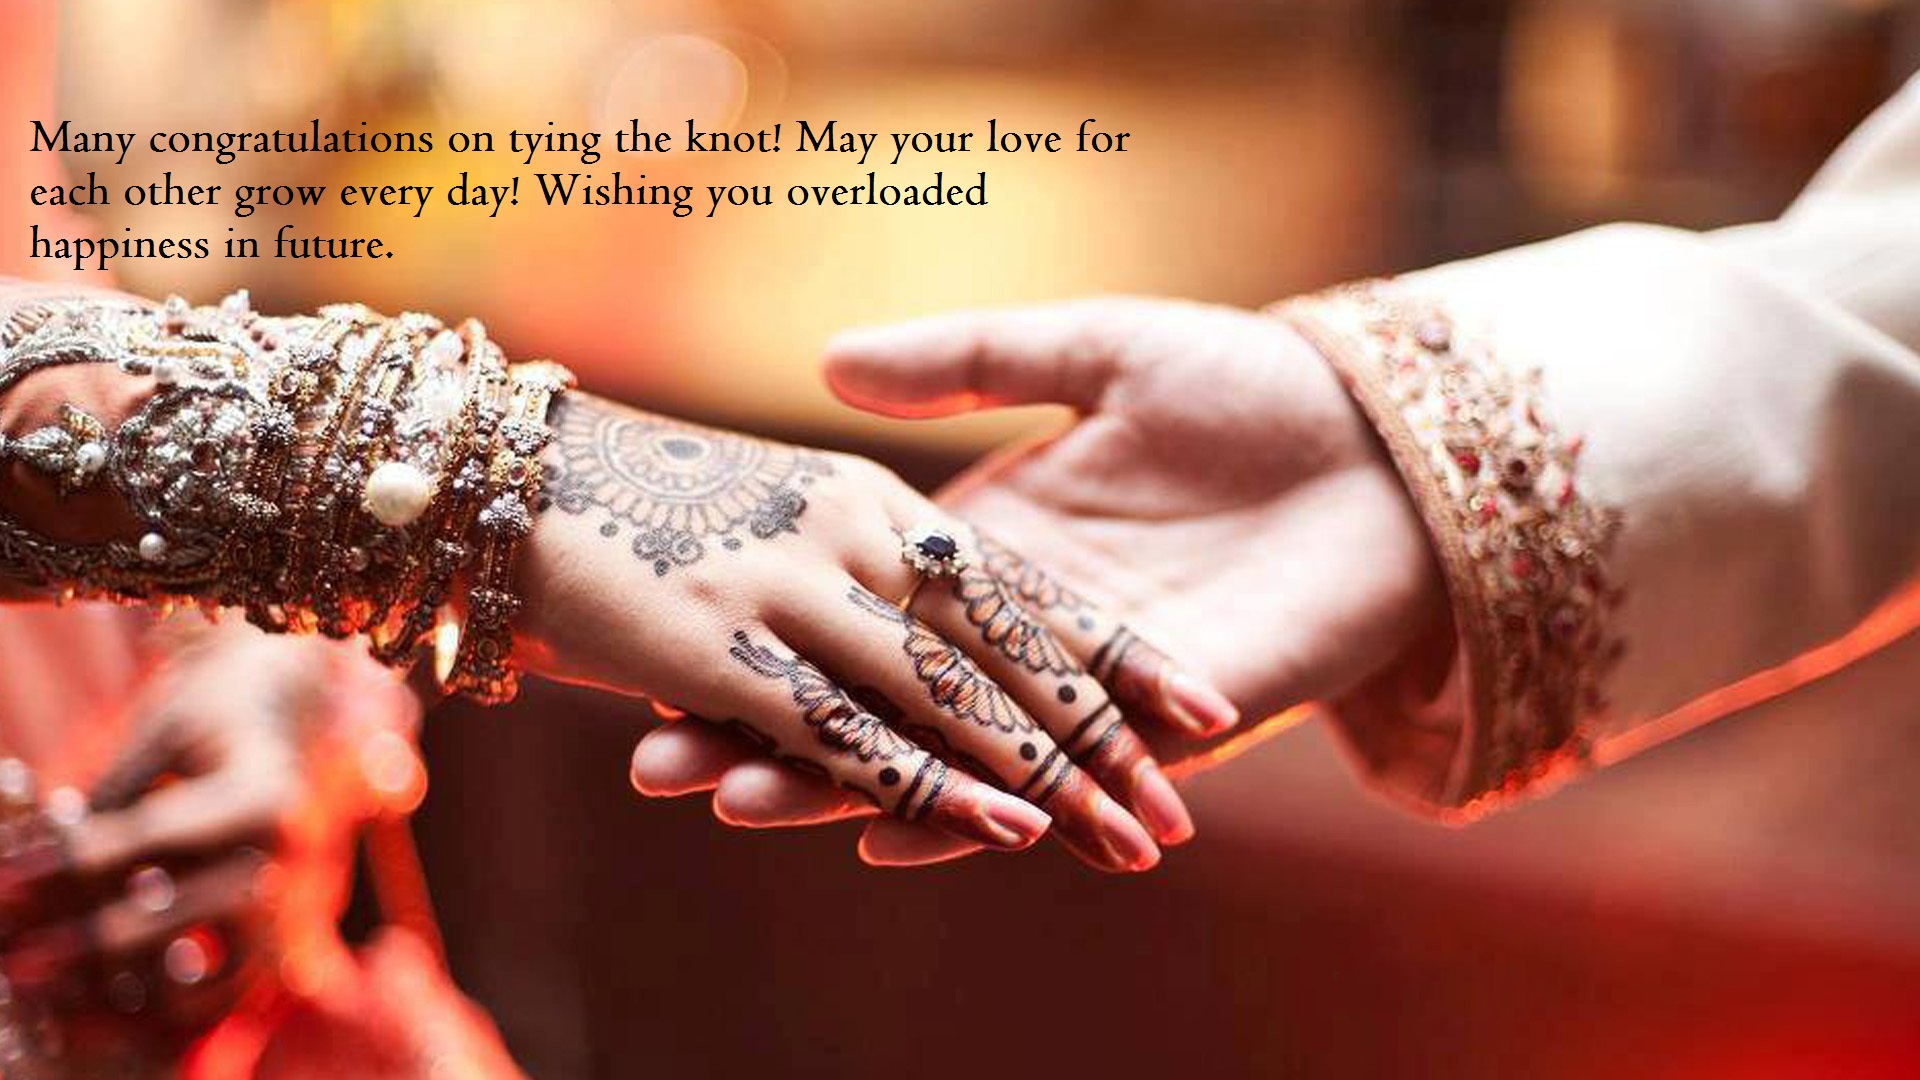 Happy Married Life Greeting Cards Wishes